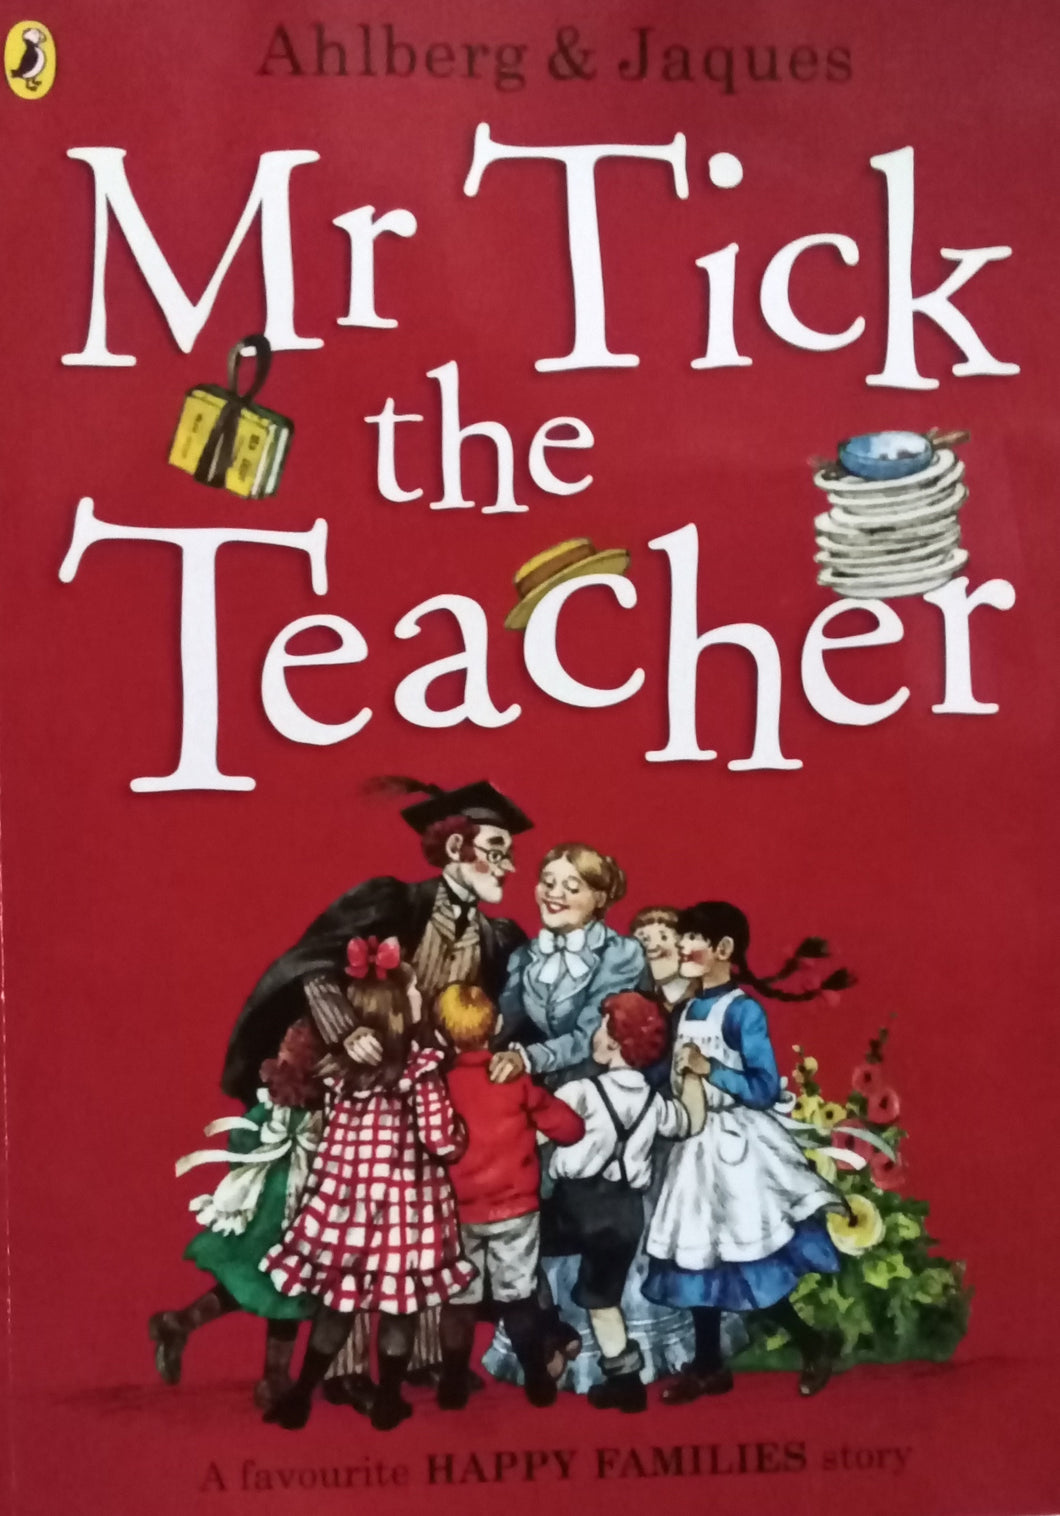 Mr.Tick The Teacher by Ahlberg & Jaques WS